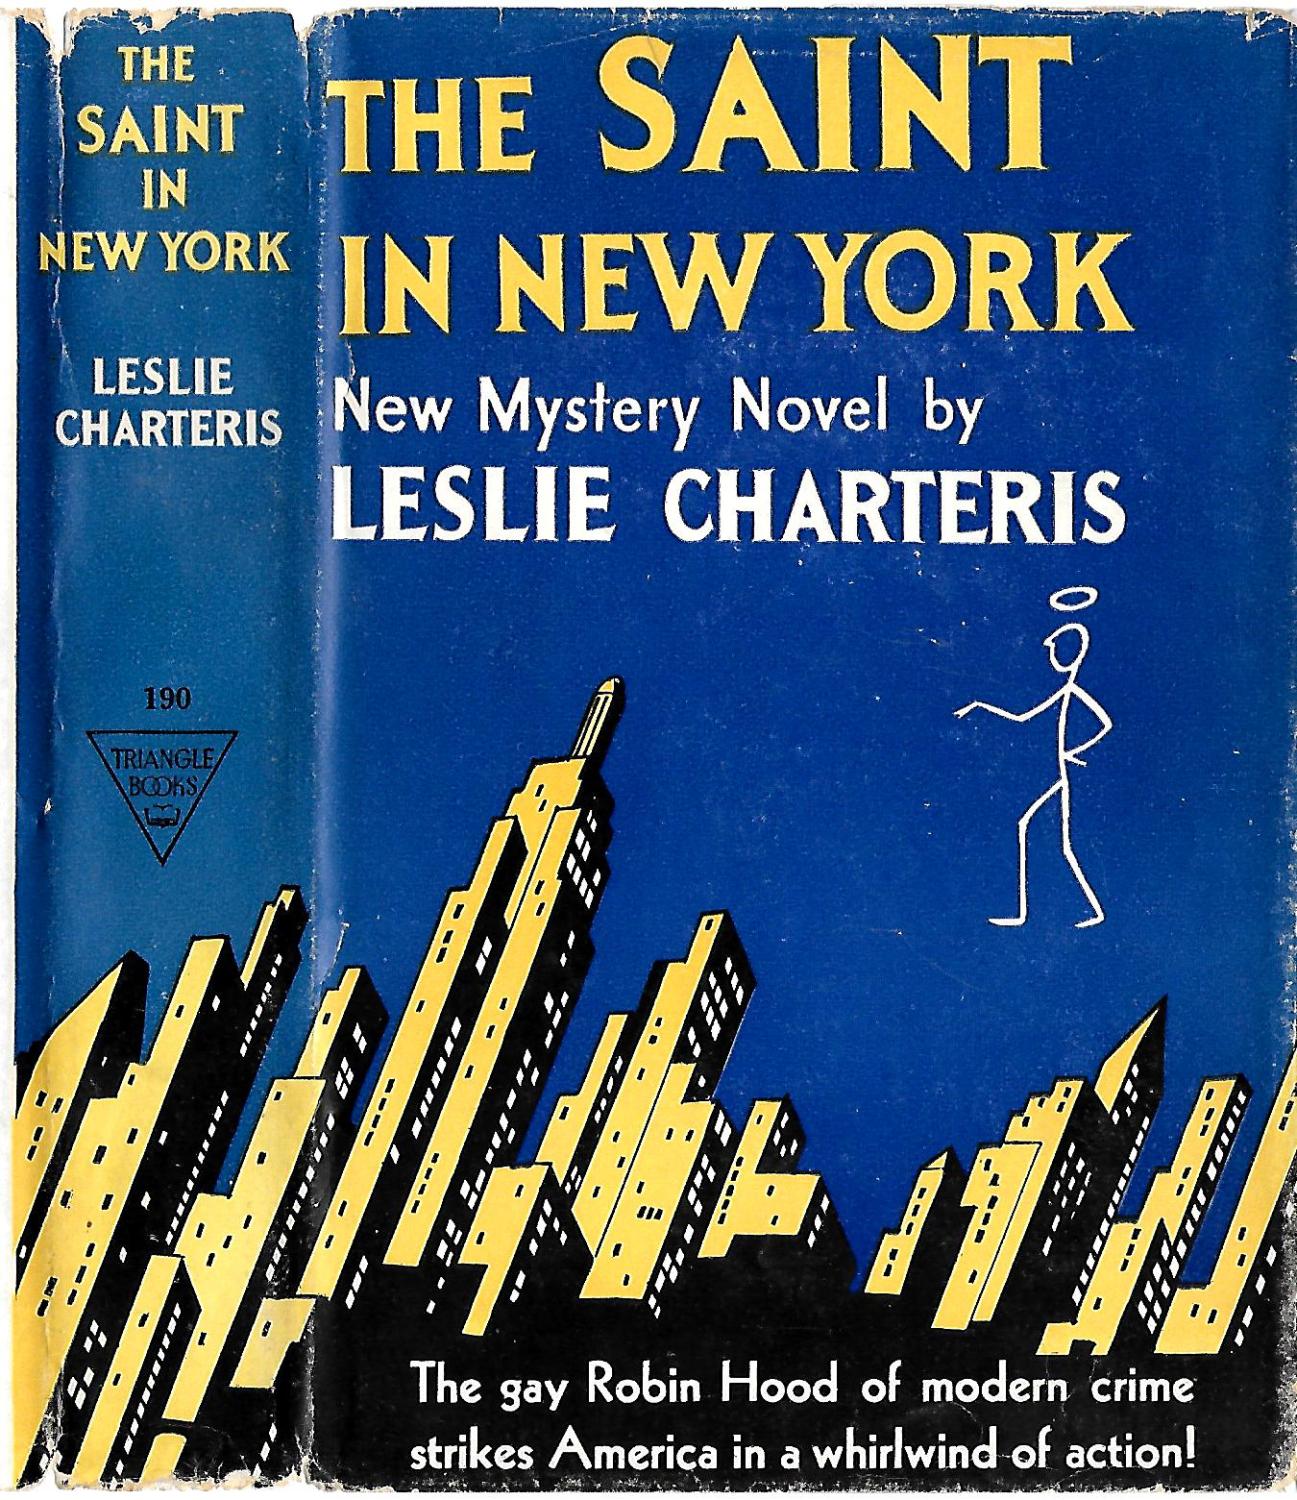 Edition　BY　Fine　THE　SAINT　First　IN　MURDER　NEW　Leslie:　YORK　by　Charteris,　Hardcover　(1941)　Thus　THE　BOOK